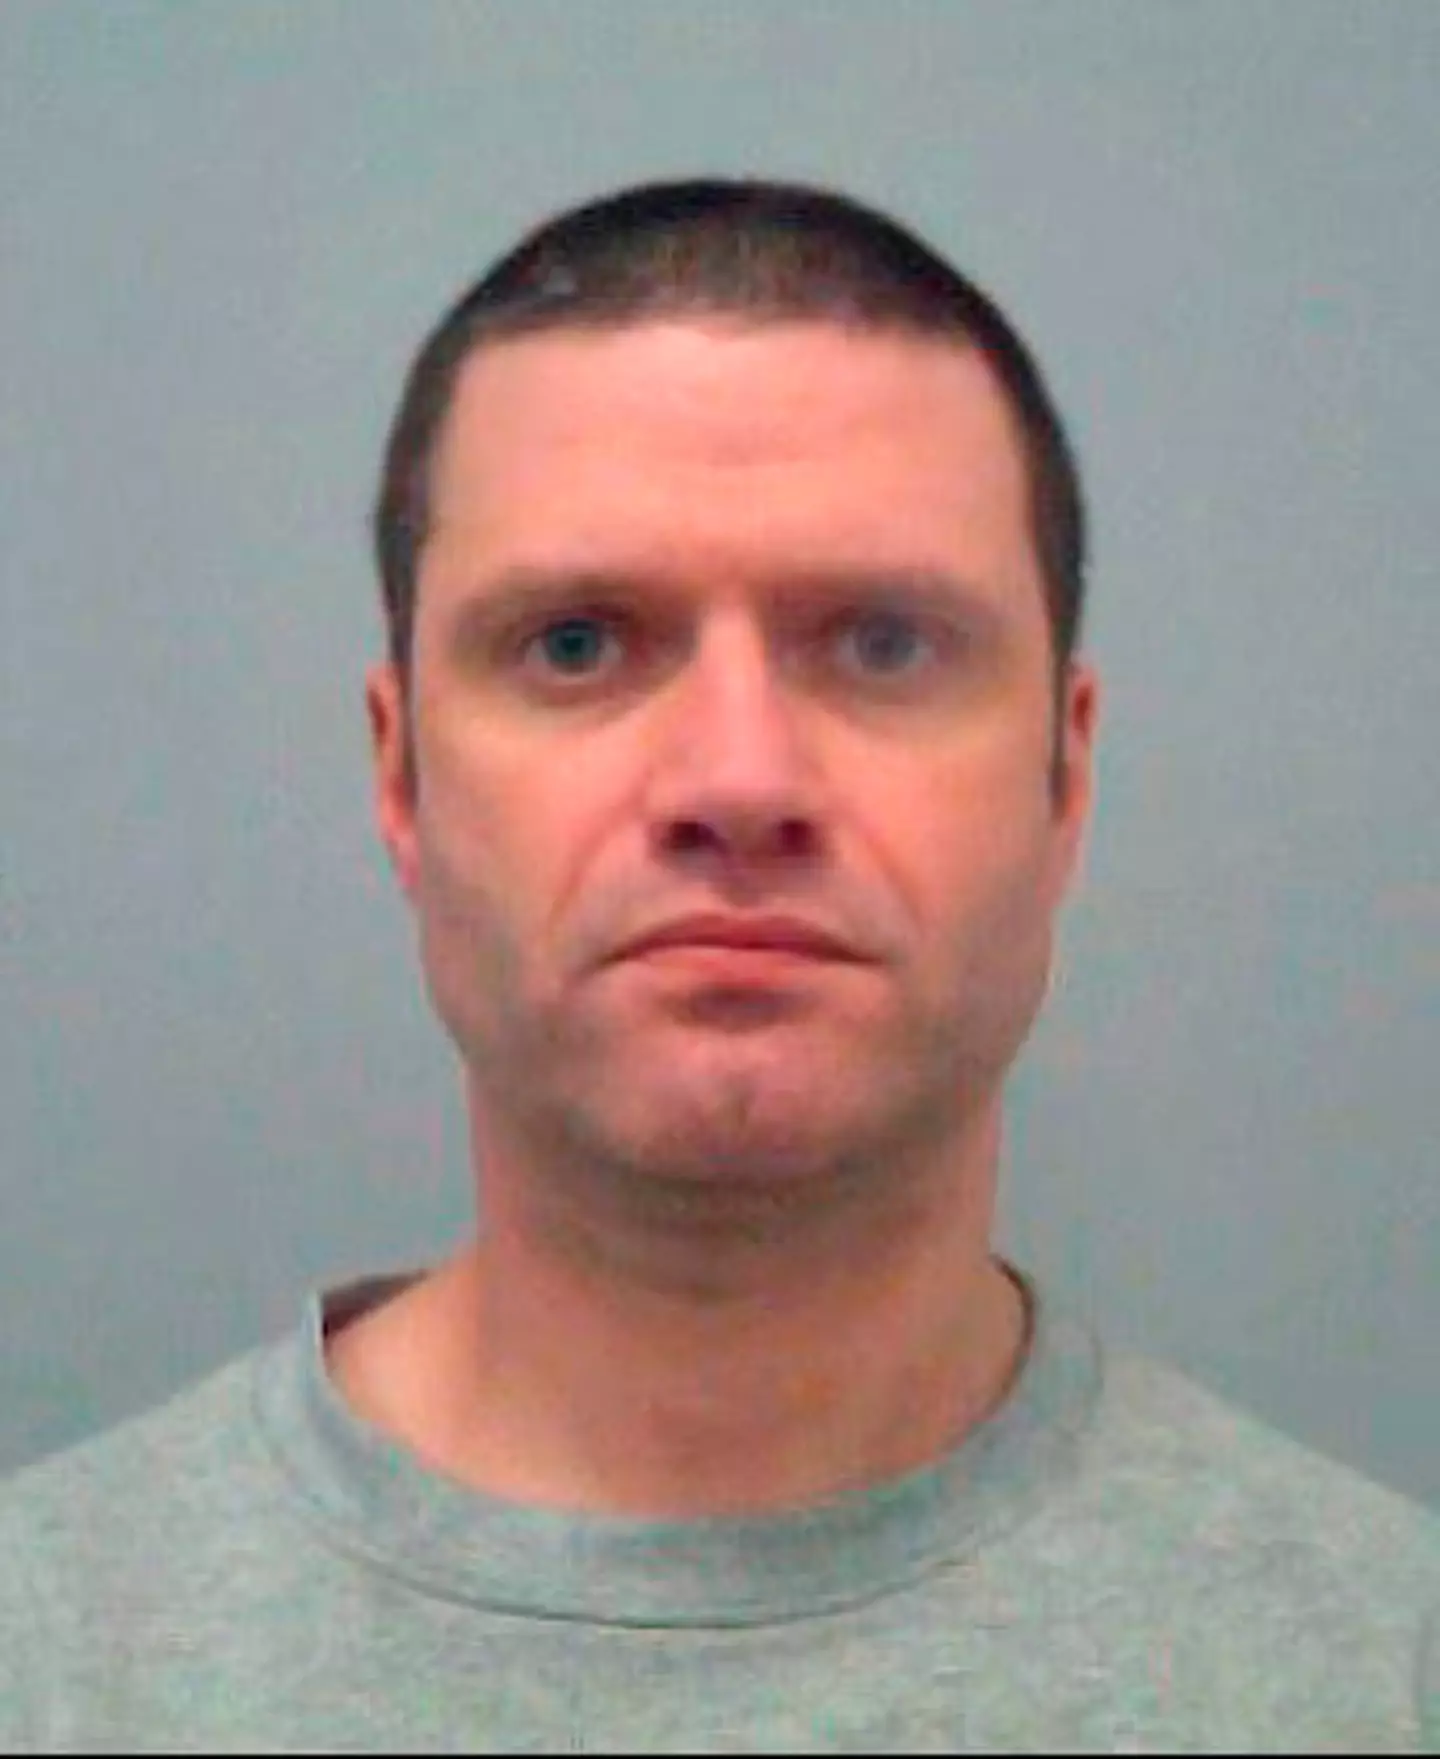 Paul Hemming was sentenced to life in prison after being found guilty of the murder of his wife.